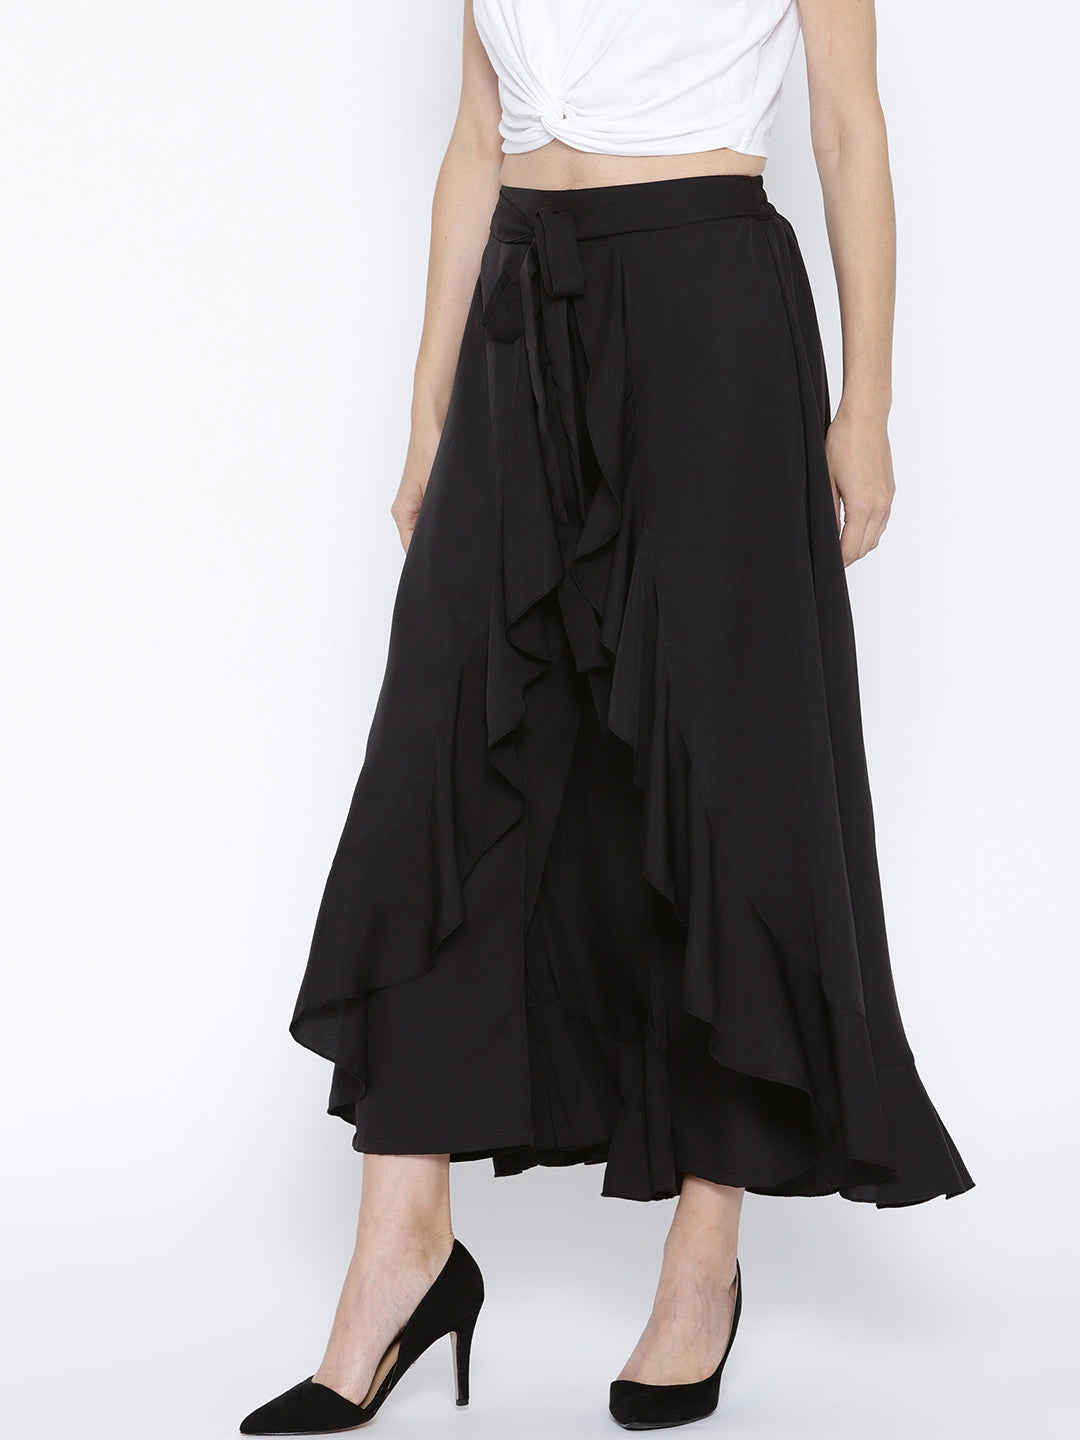 Black Solid Ruffled Flared Maxi Skirt with Attached Trousers - Berrylush